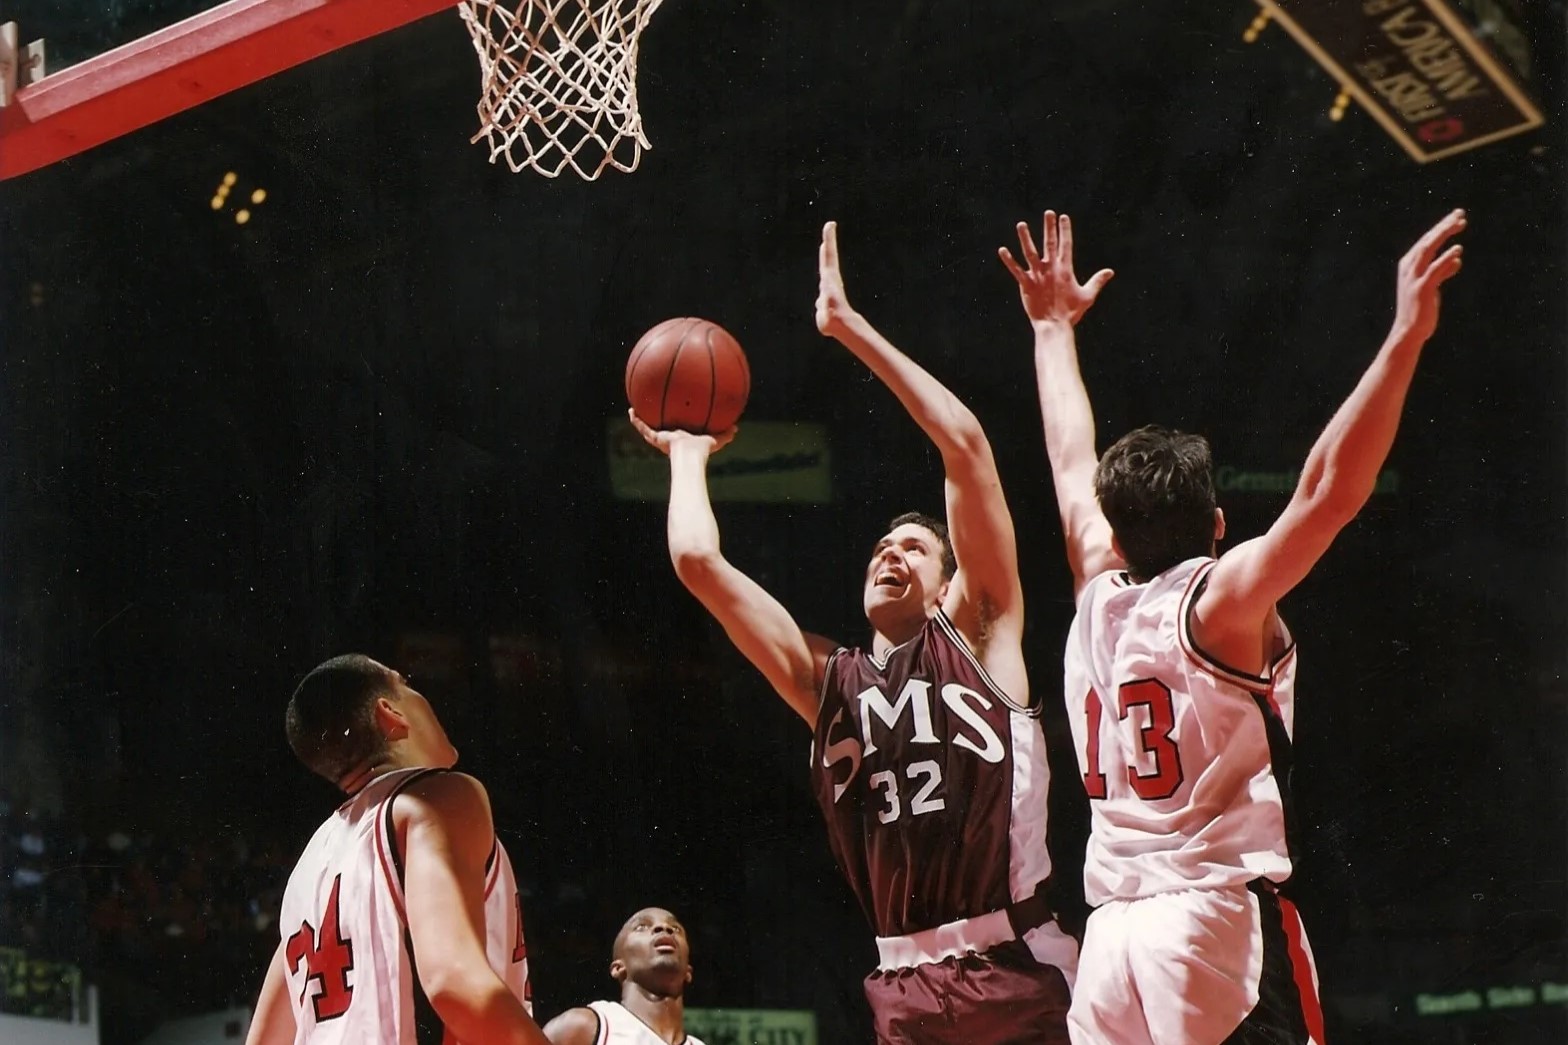 Danny Moore shoots the ball during a mid-1990s game at Bradley University.